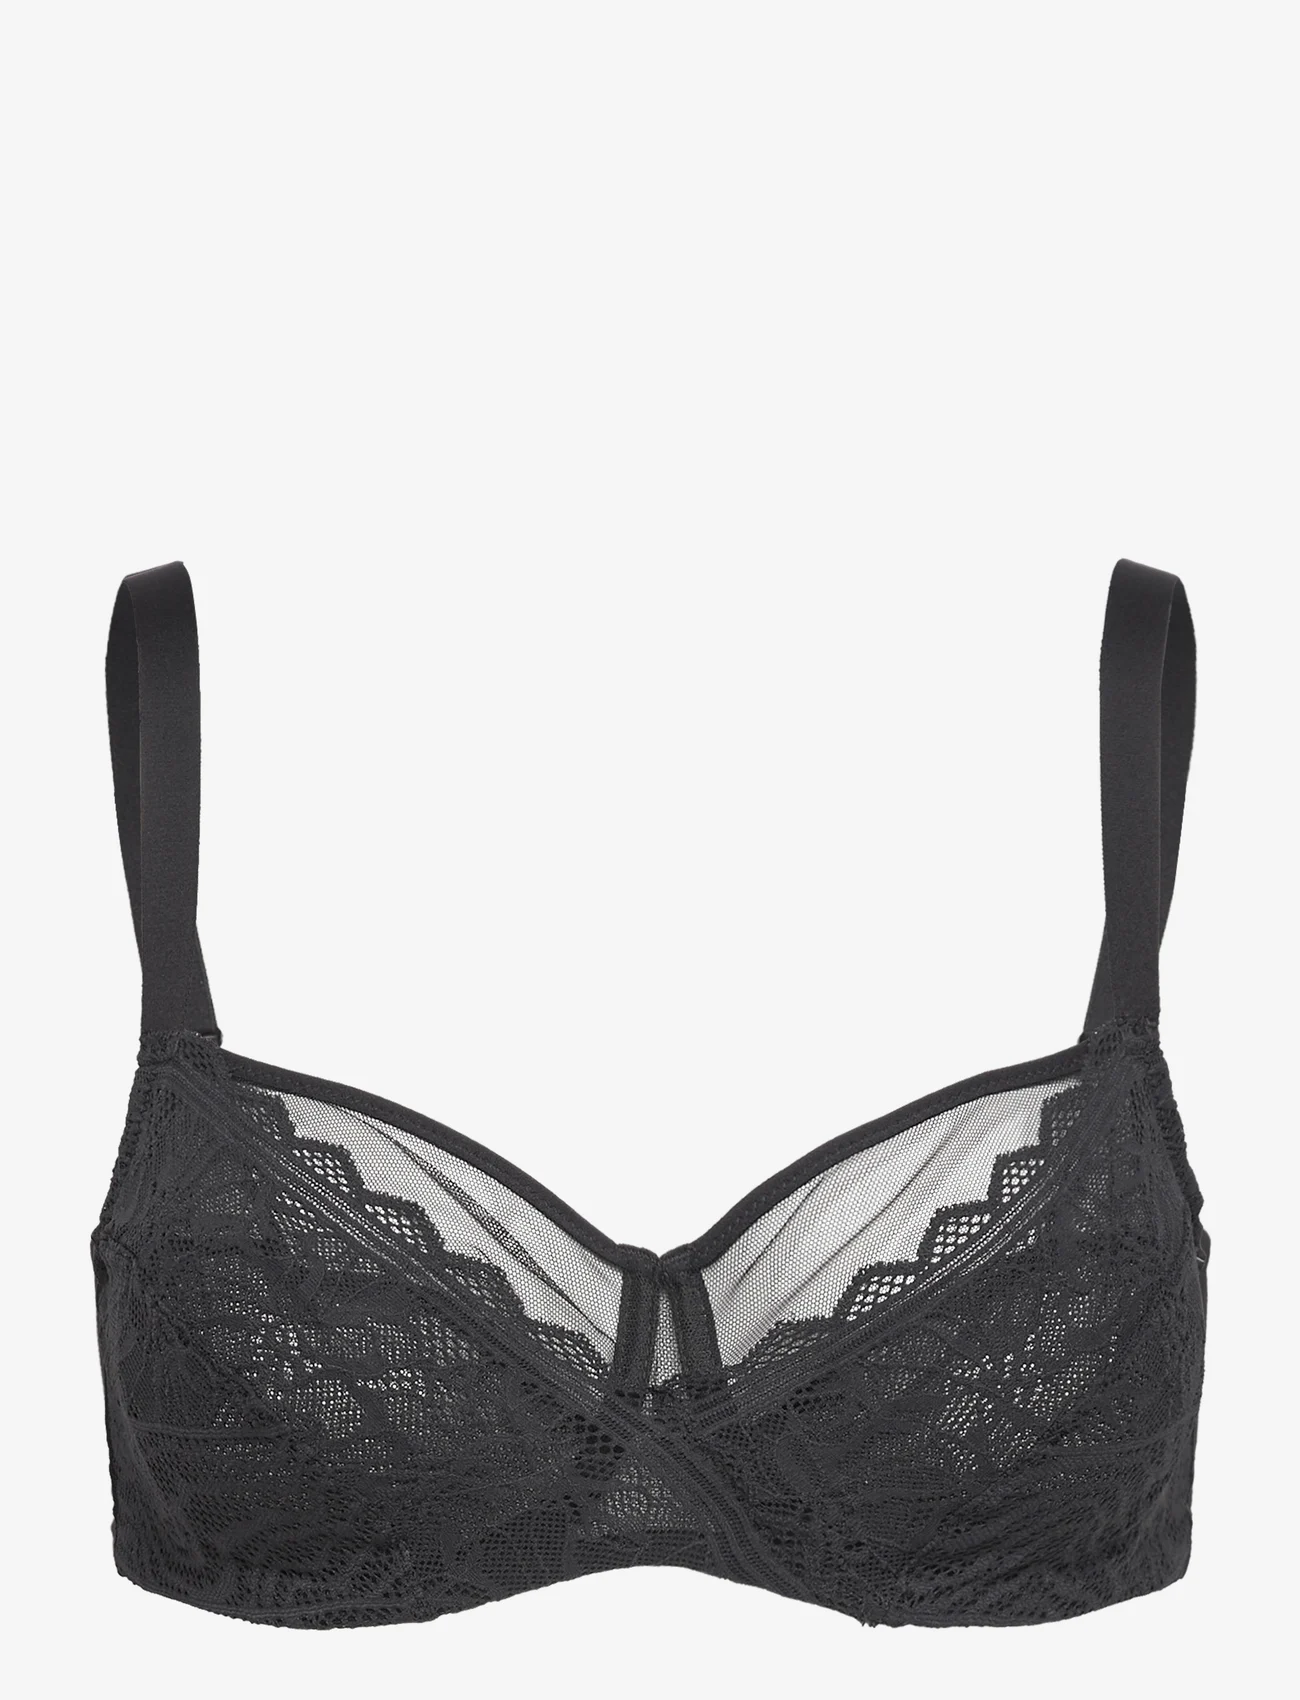 CHANTELLE - Floral Touch Very Covering Underwired bra - helkupa bh:ar - black - 0